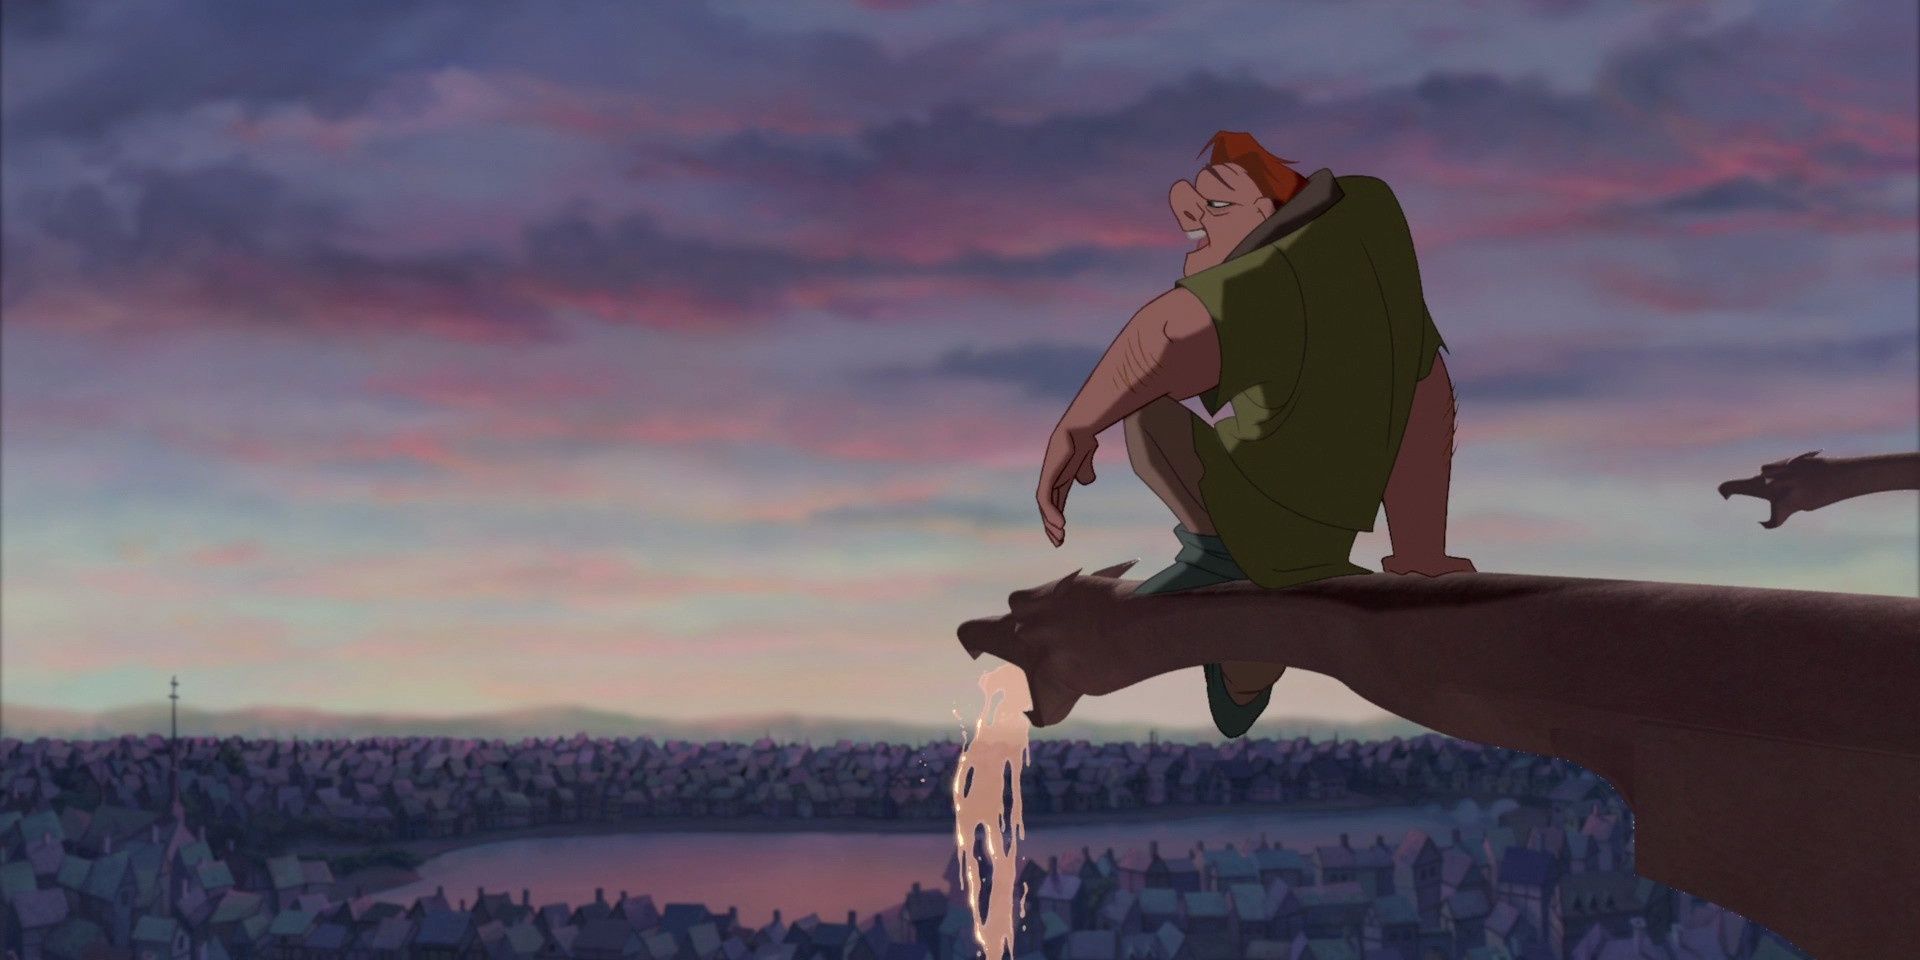 10 Disney Movies That Are Better When Youre An Adult